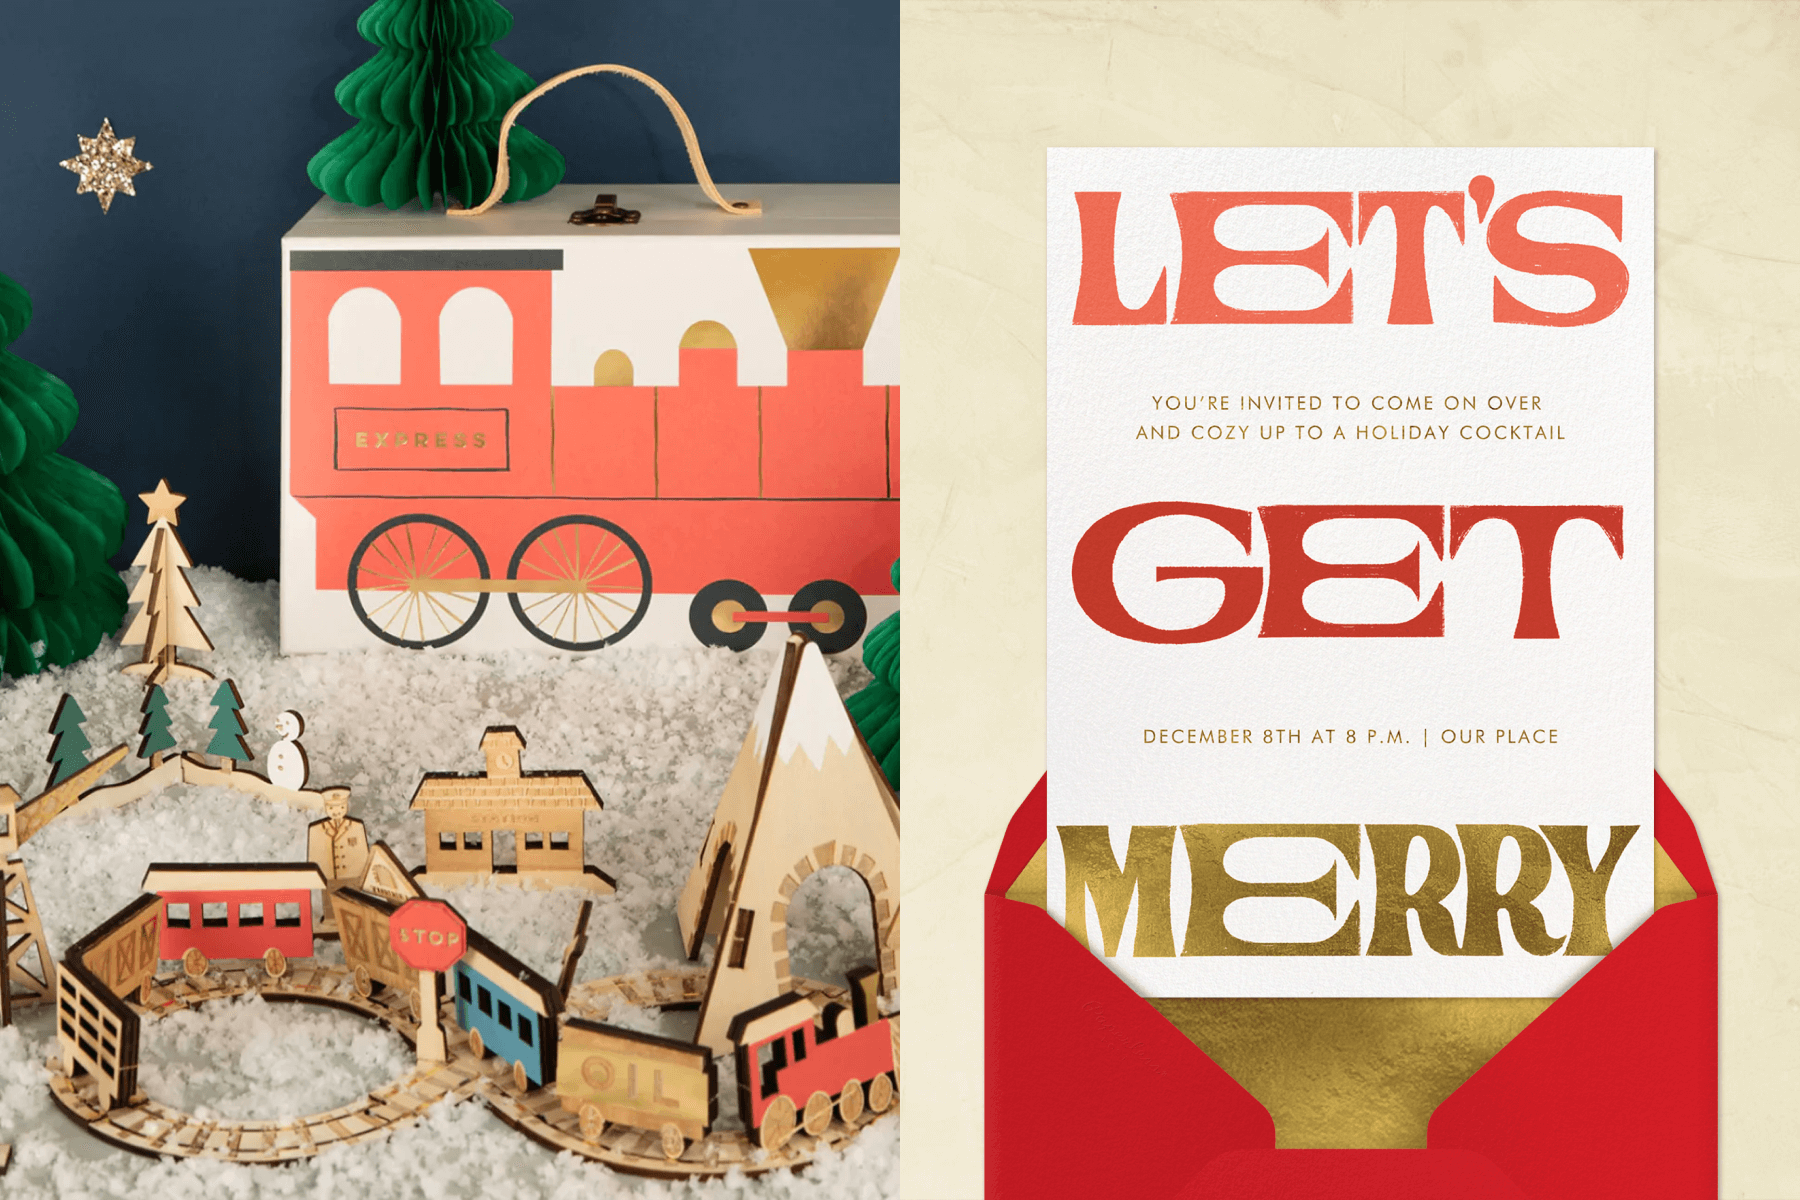 Left: Close-up photograph of a railway train advent calendar; Right: A white Christmas invitation featuring a handlettered “Let’s Get Merry.”